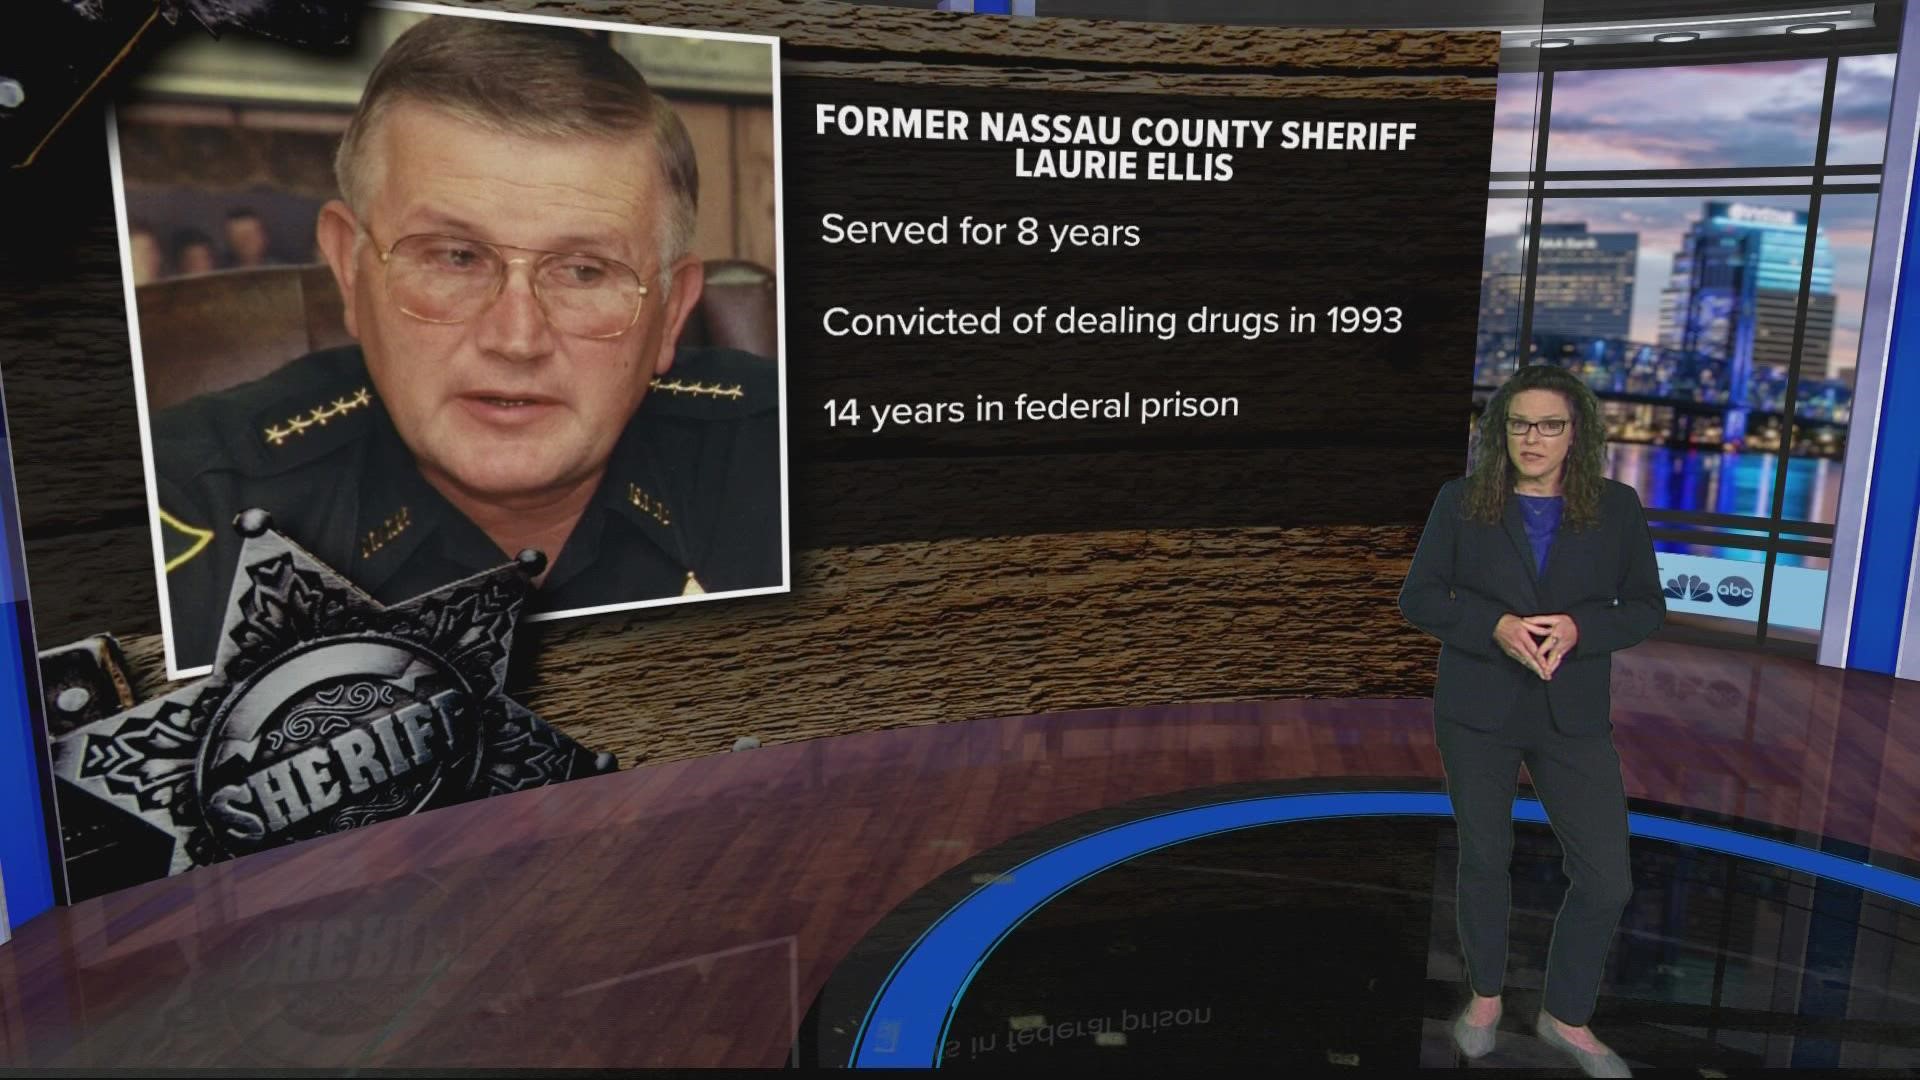 A look at the history of Sheriff scandals.